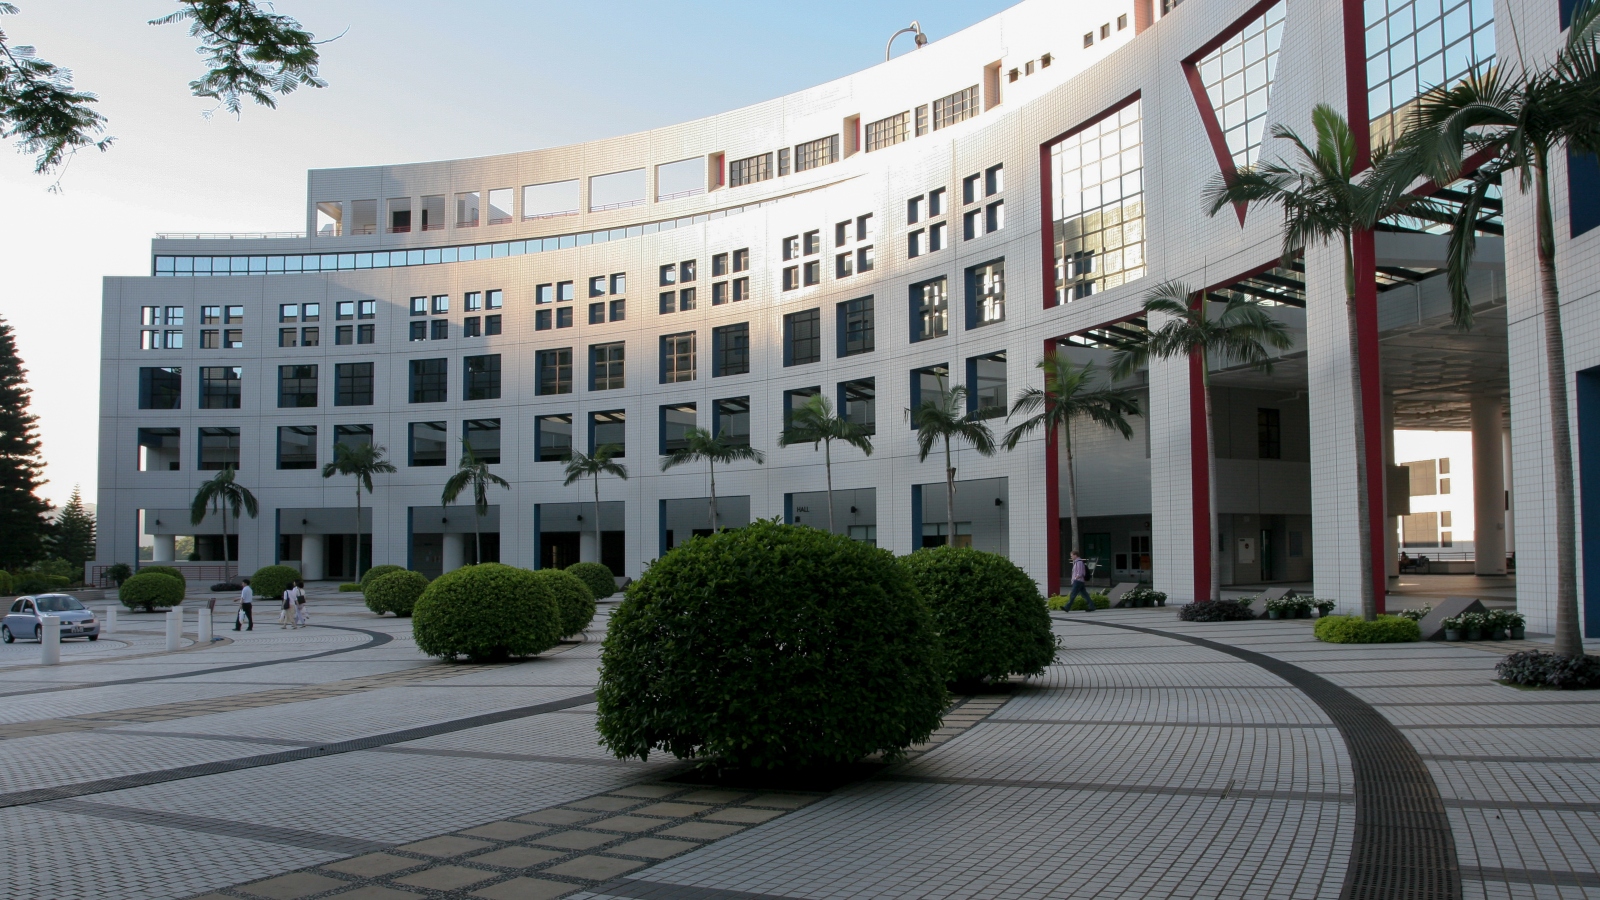 22 May 2005 the main front of the campus at the HKUST